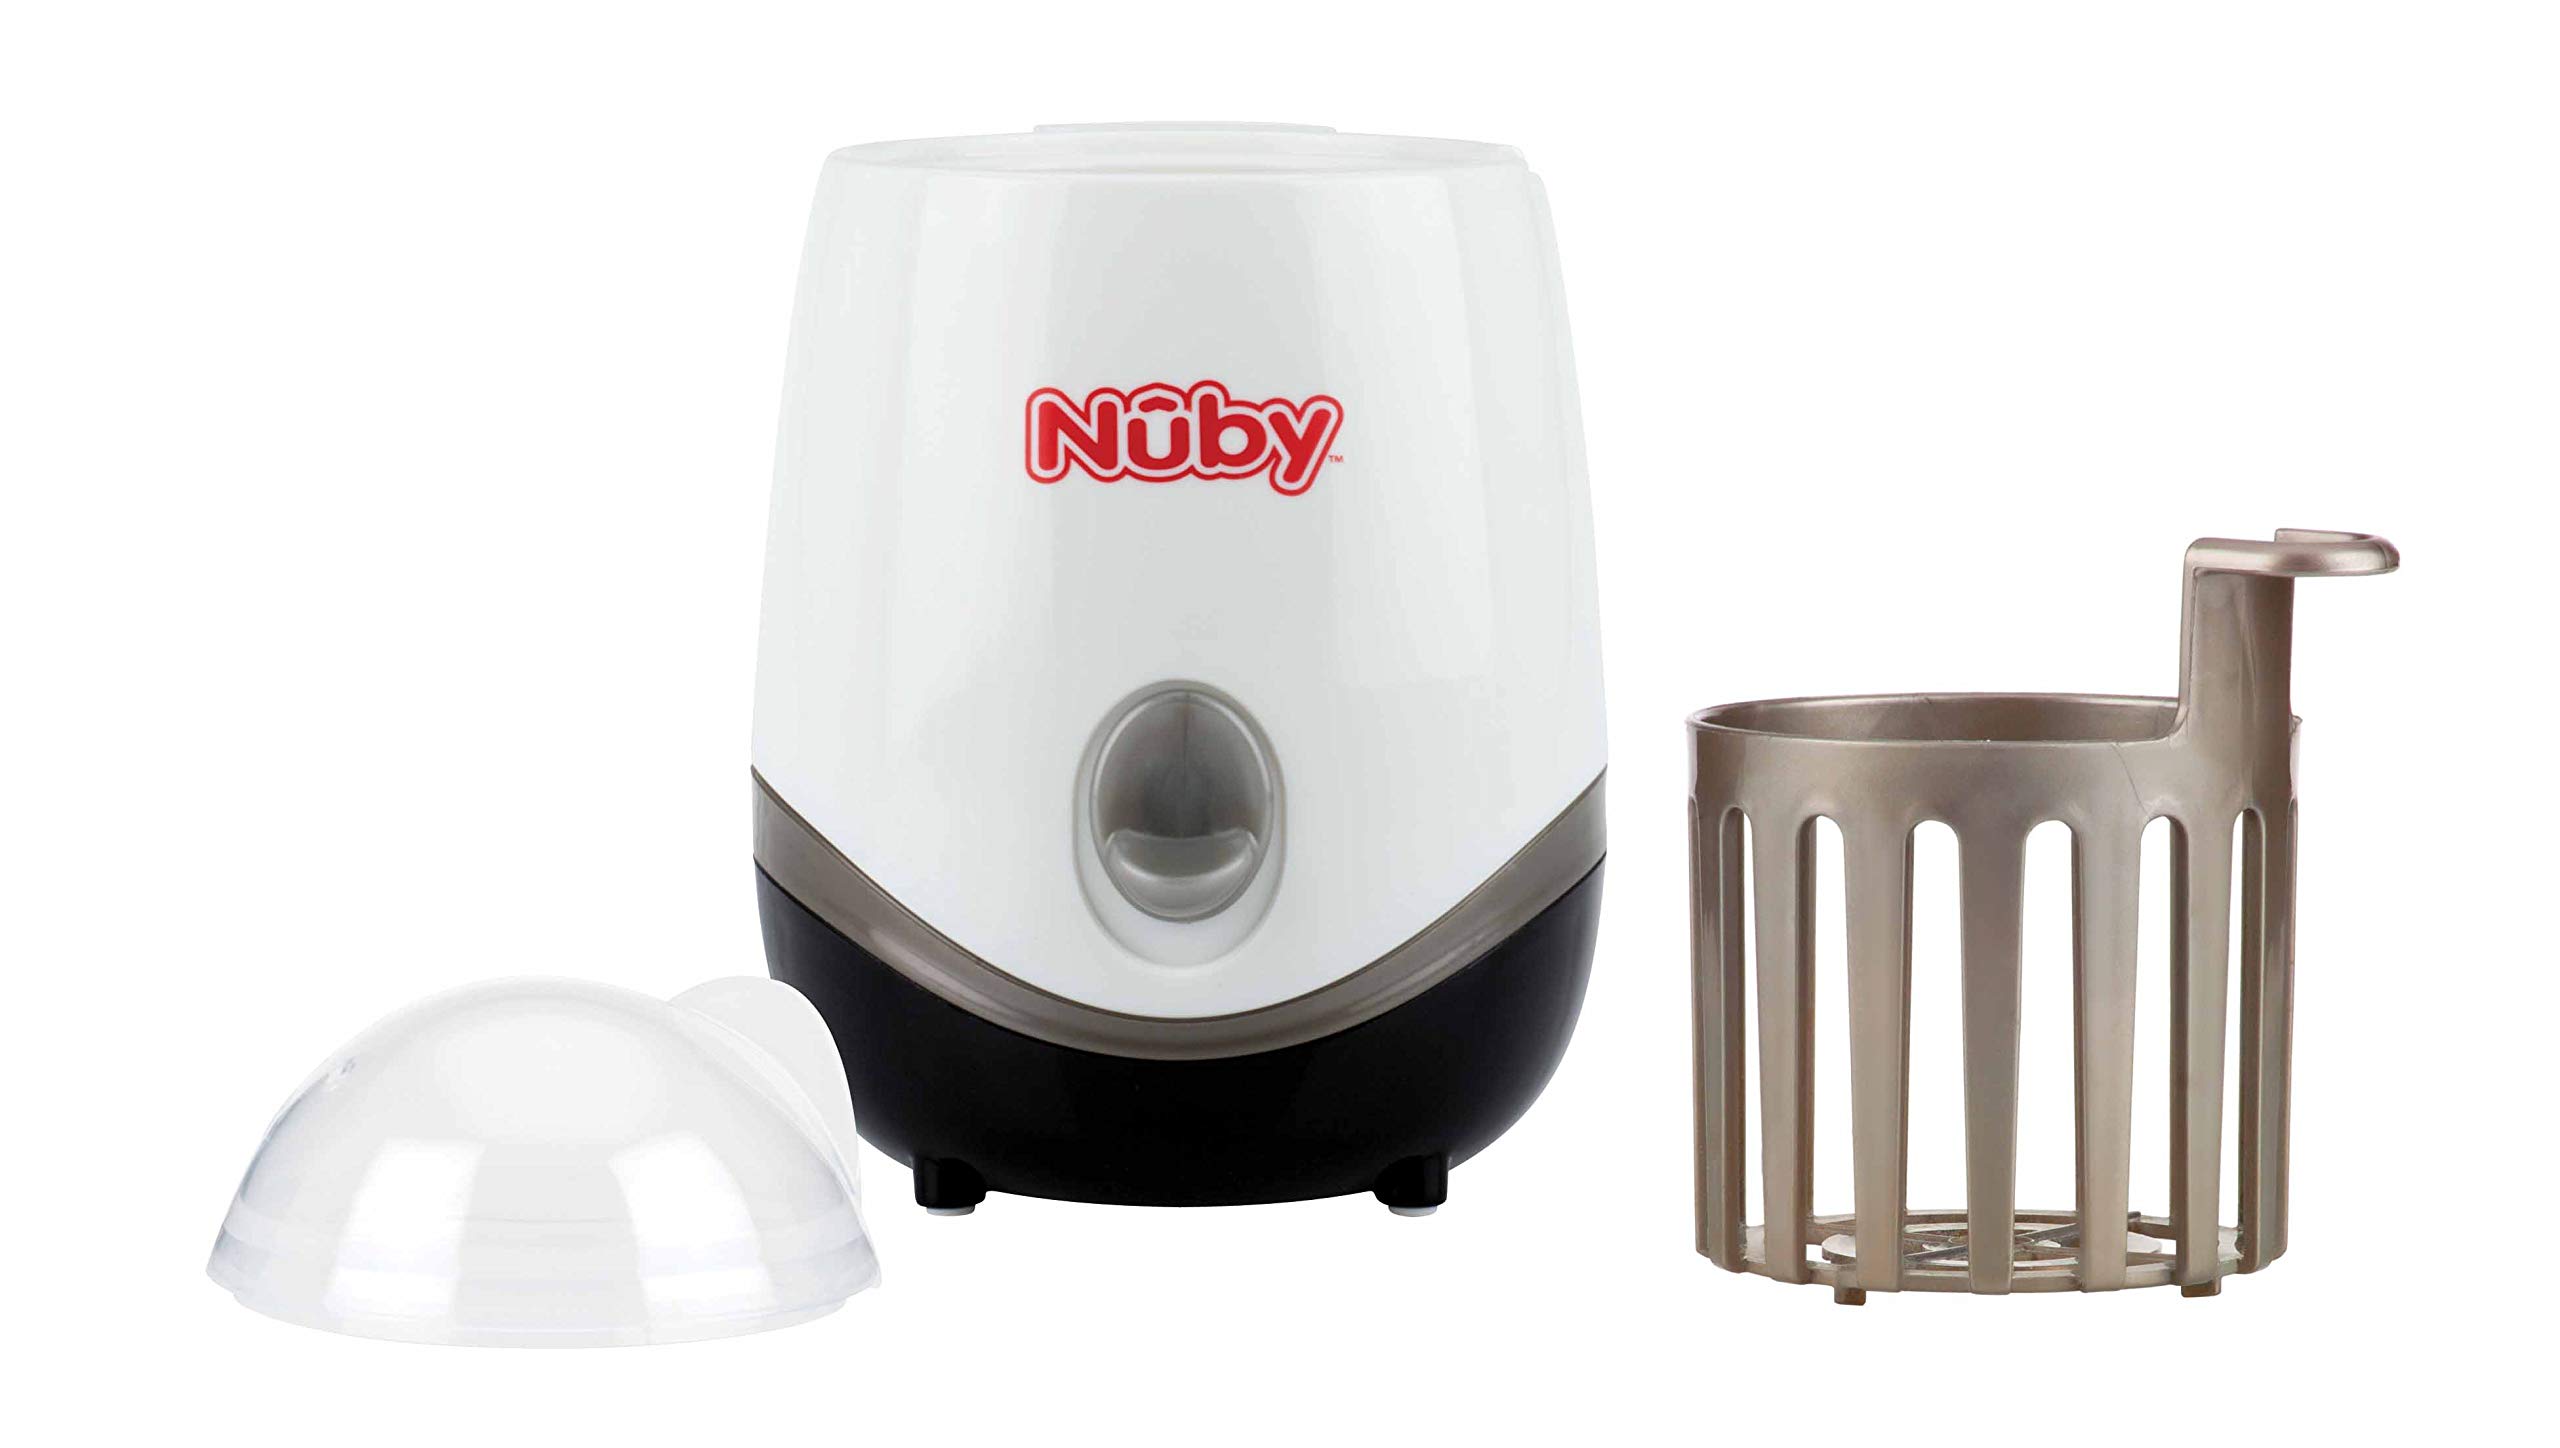 Nuby One-Touch 2-in-1 Electric Baby Bottle Warmer & Sterilizer